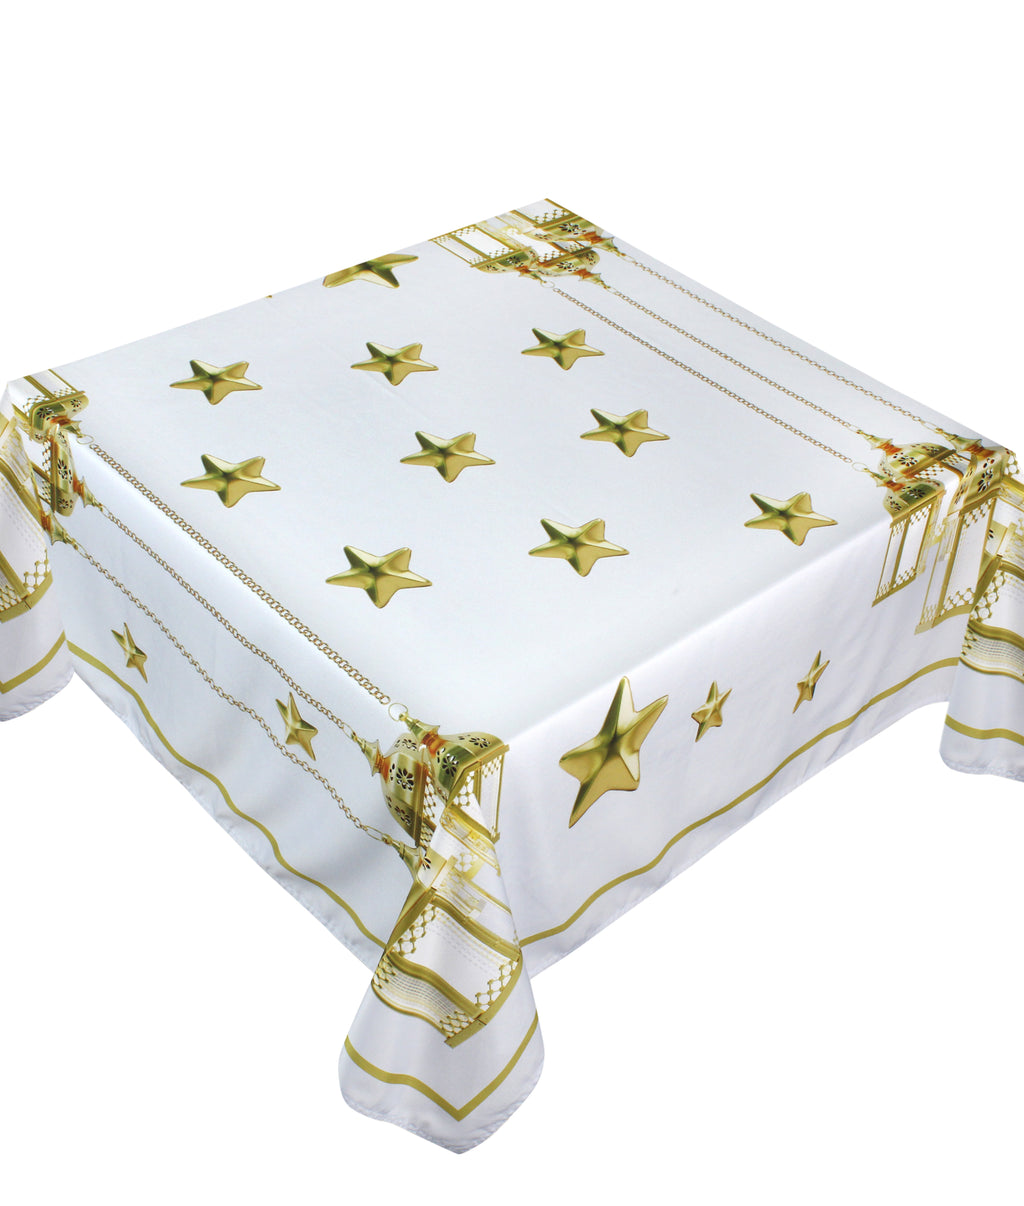 The Golden chains and lanterns table cover